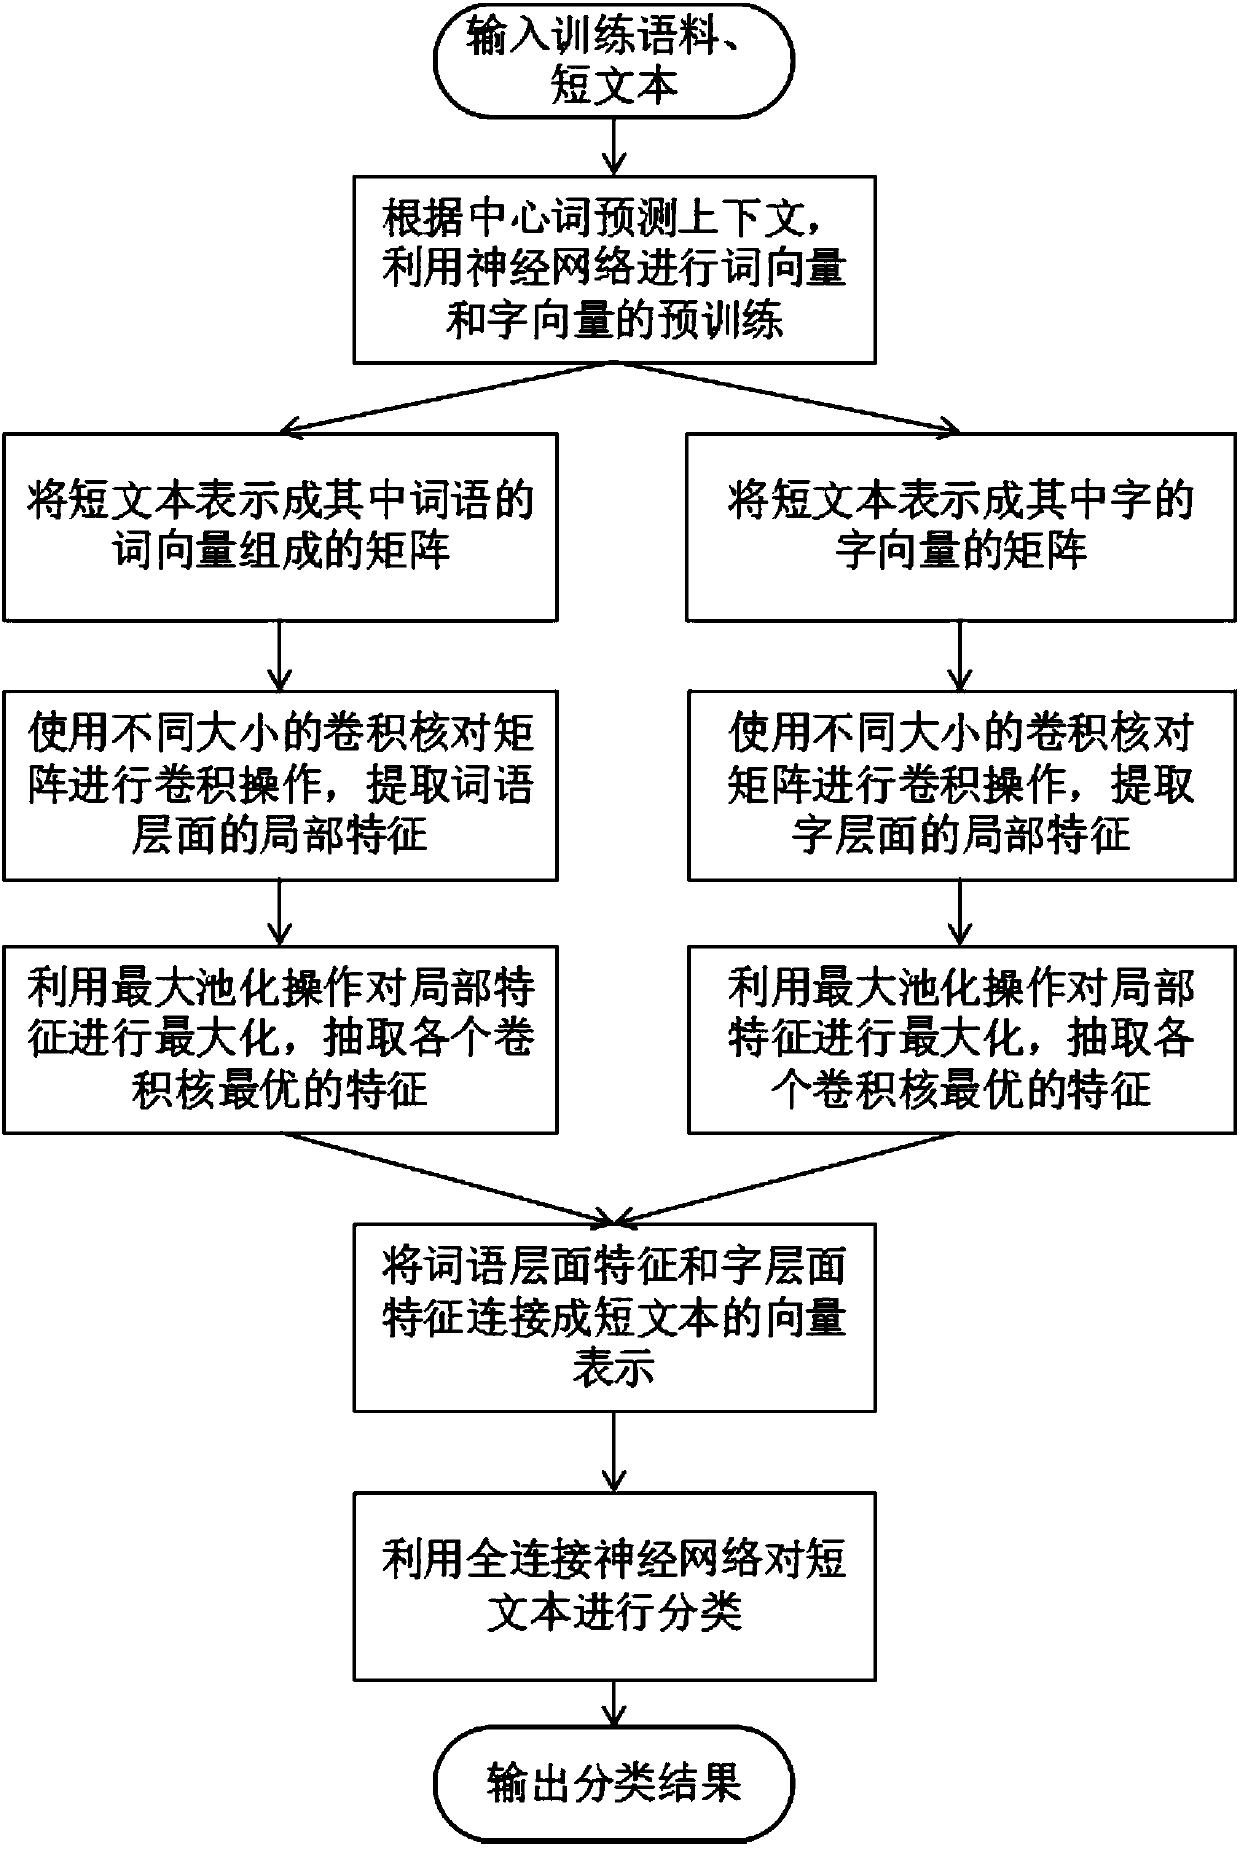 Text classification method based on feature information of characters and terms